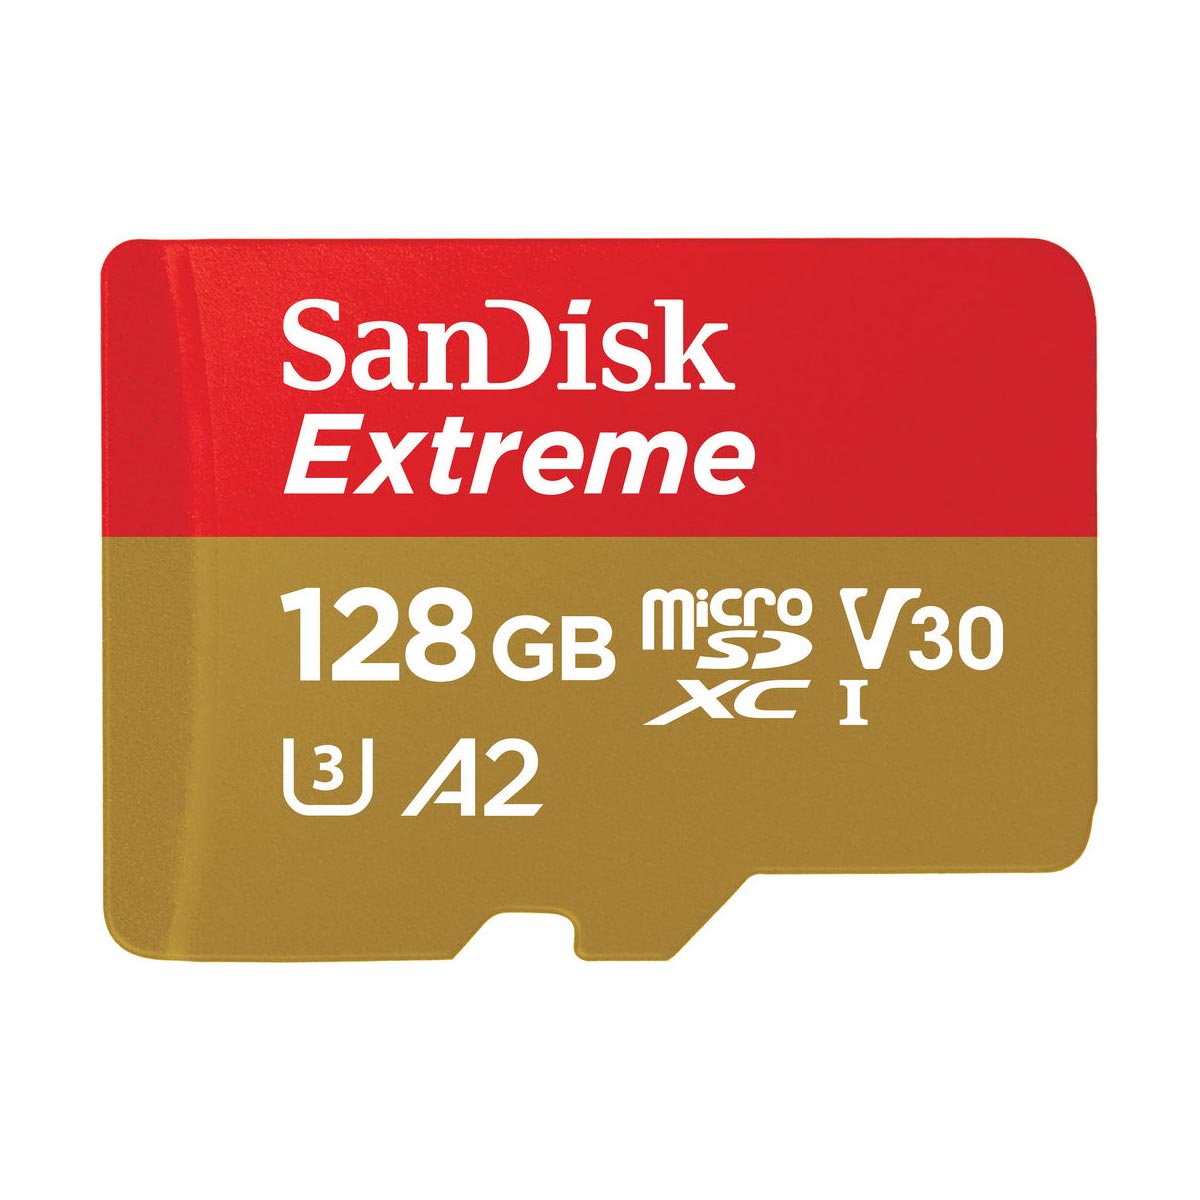 SanDisk 128GB Extreme UHS-I microSDXC 190mb/s Memory Card with SD Adapter